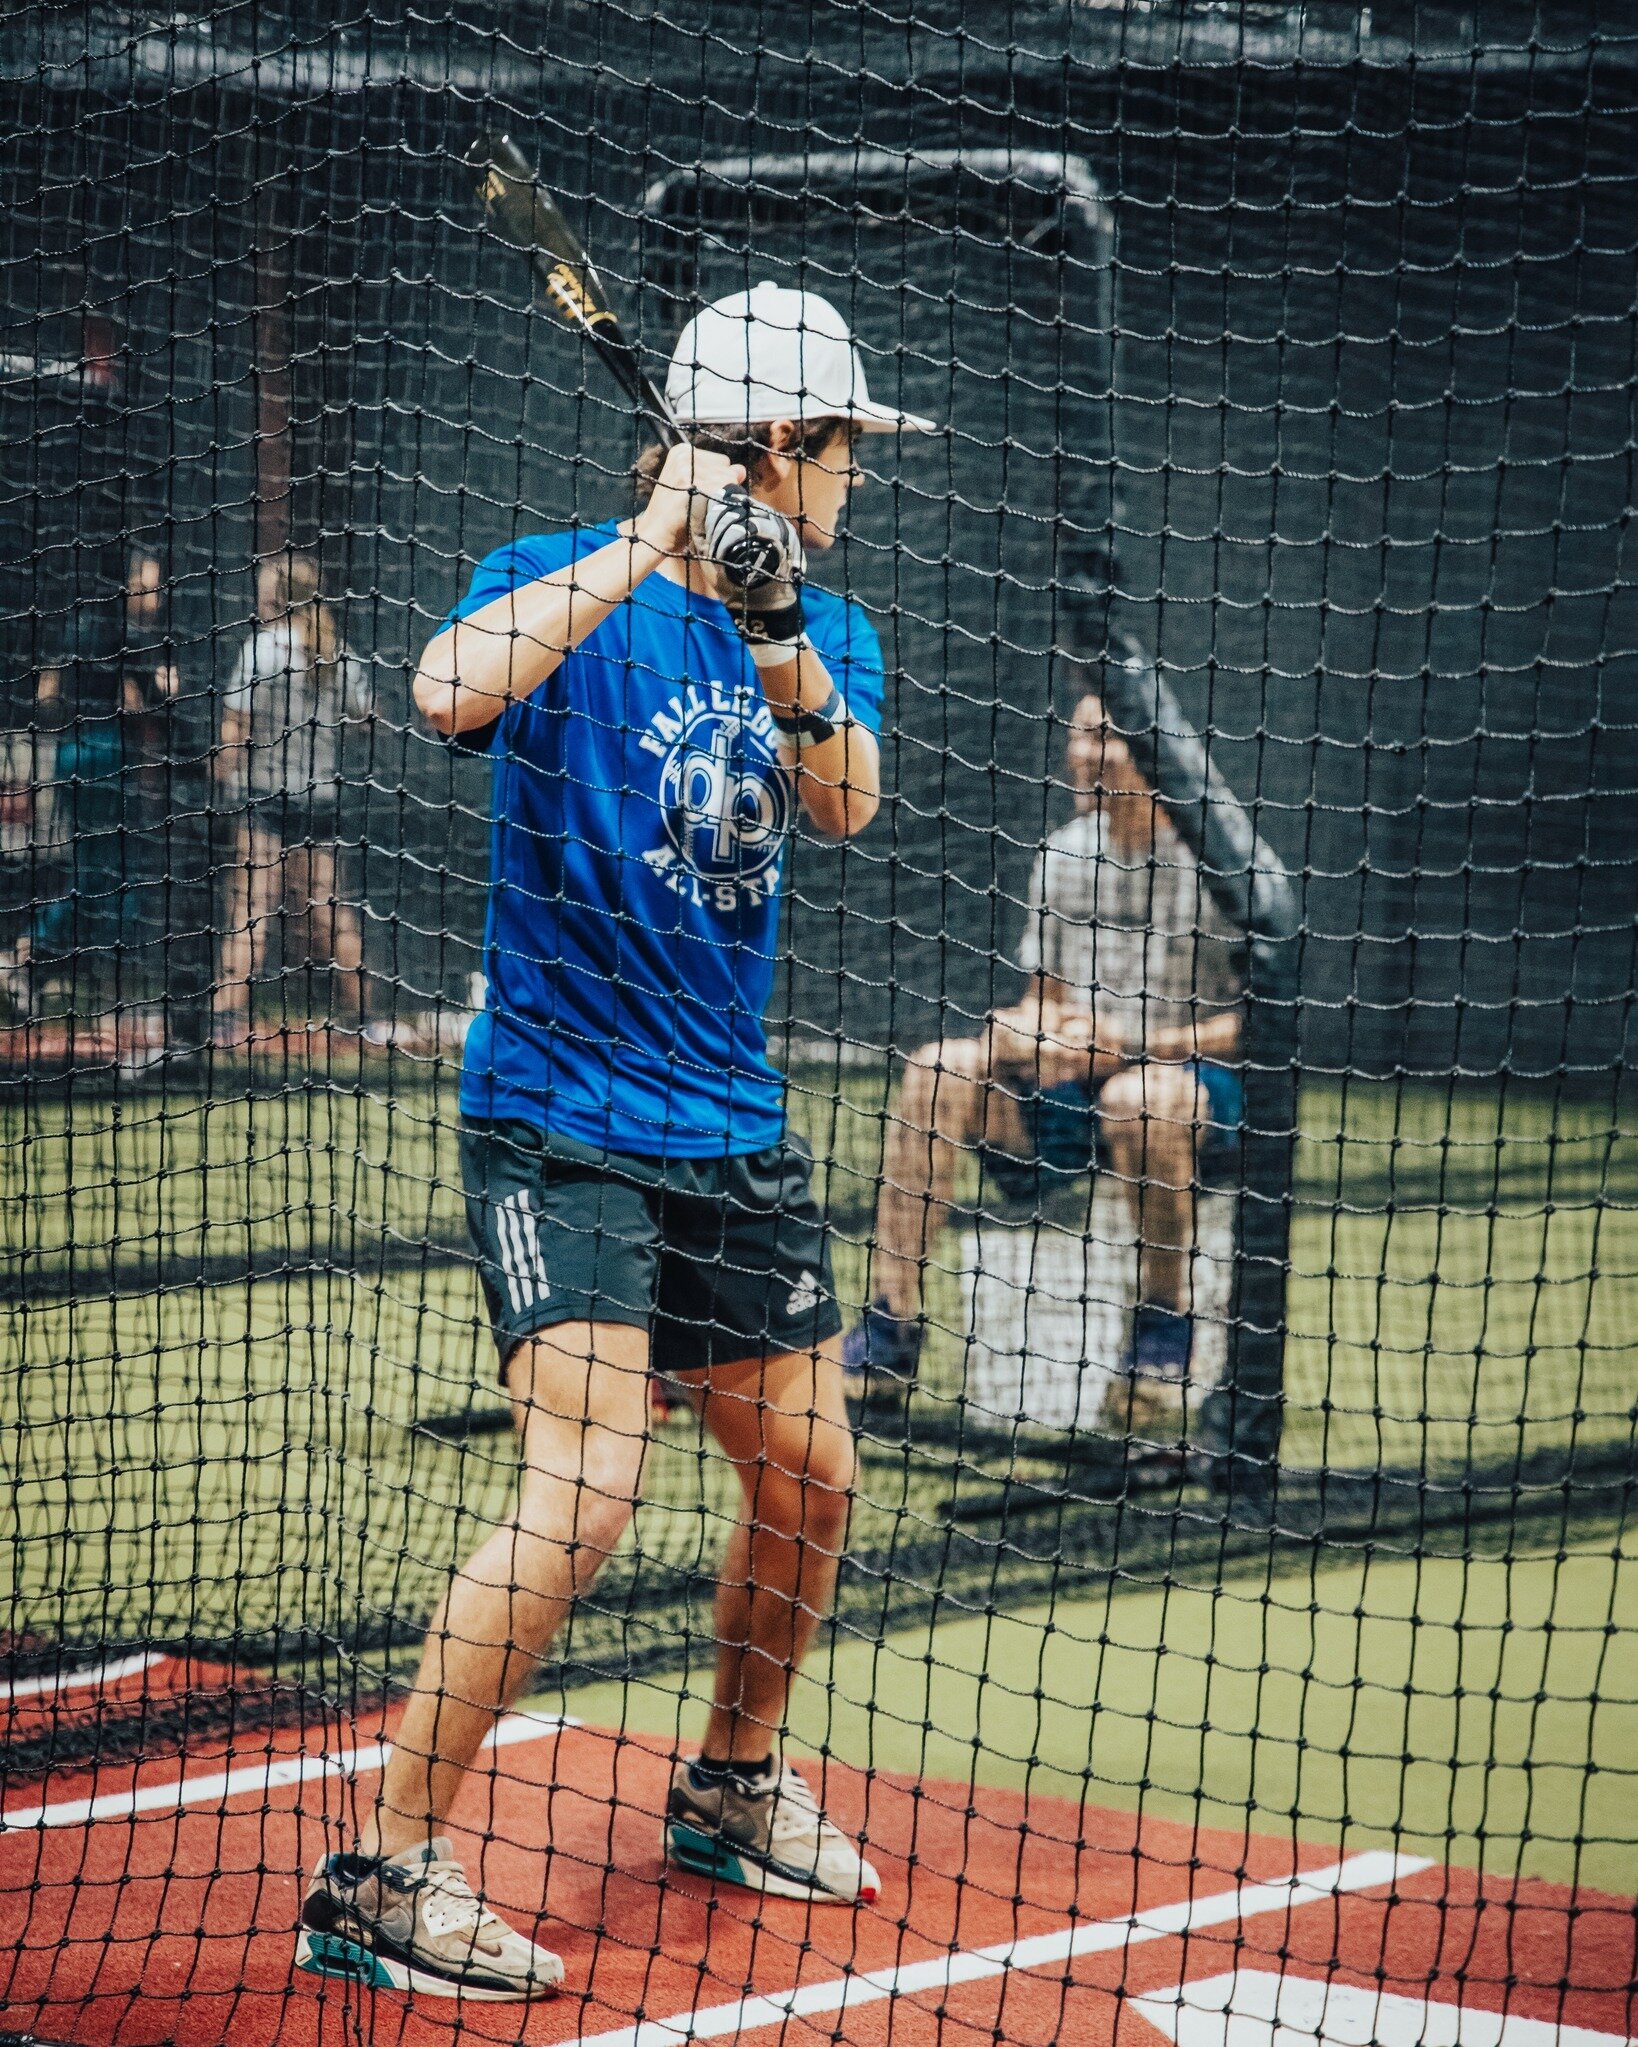 🚨WE GOT LIVE AT-BATS THIS SATURDAY🚨
Live ABs this Saturday 8am to 11am for athletes aged 15+. Pitchers and catchers are free, hitters are $10, all interested athletes reach out to Mason. See You in The Vault🔒